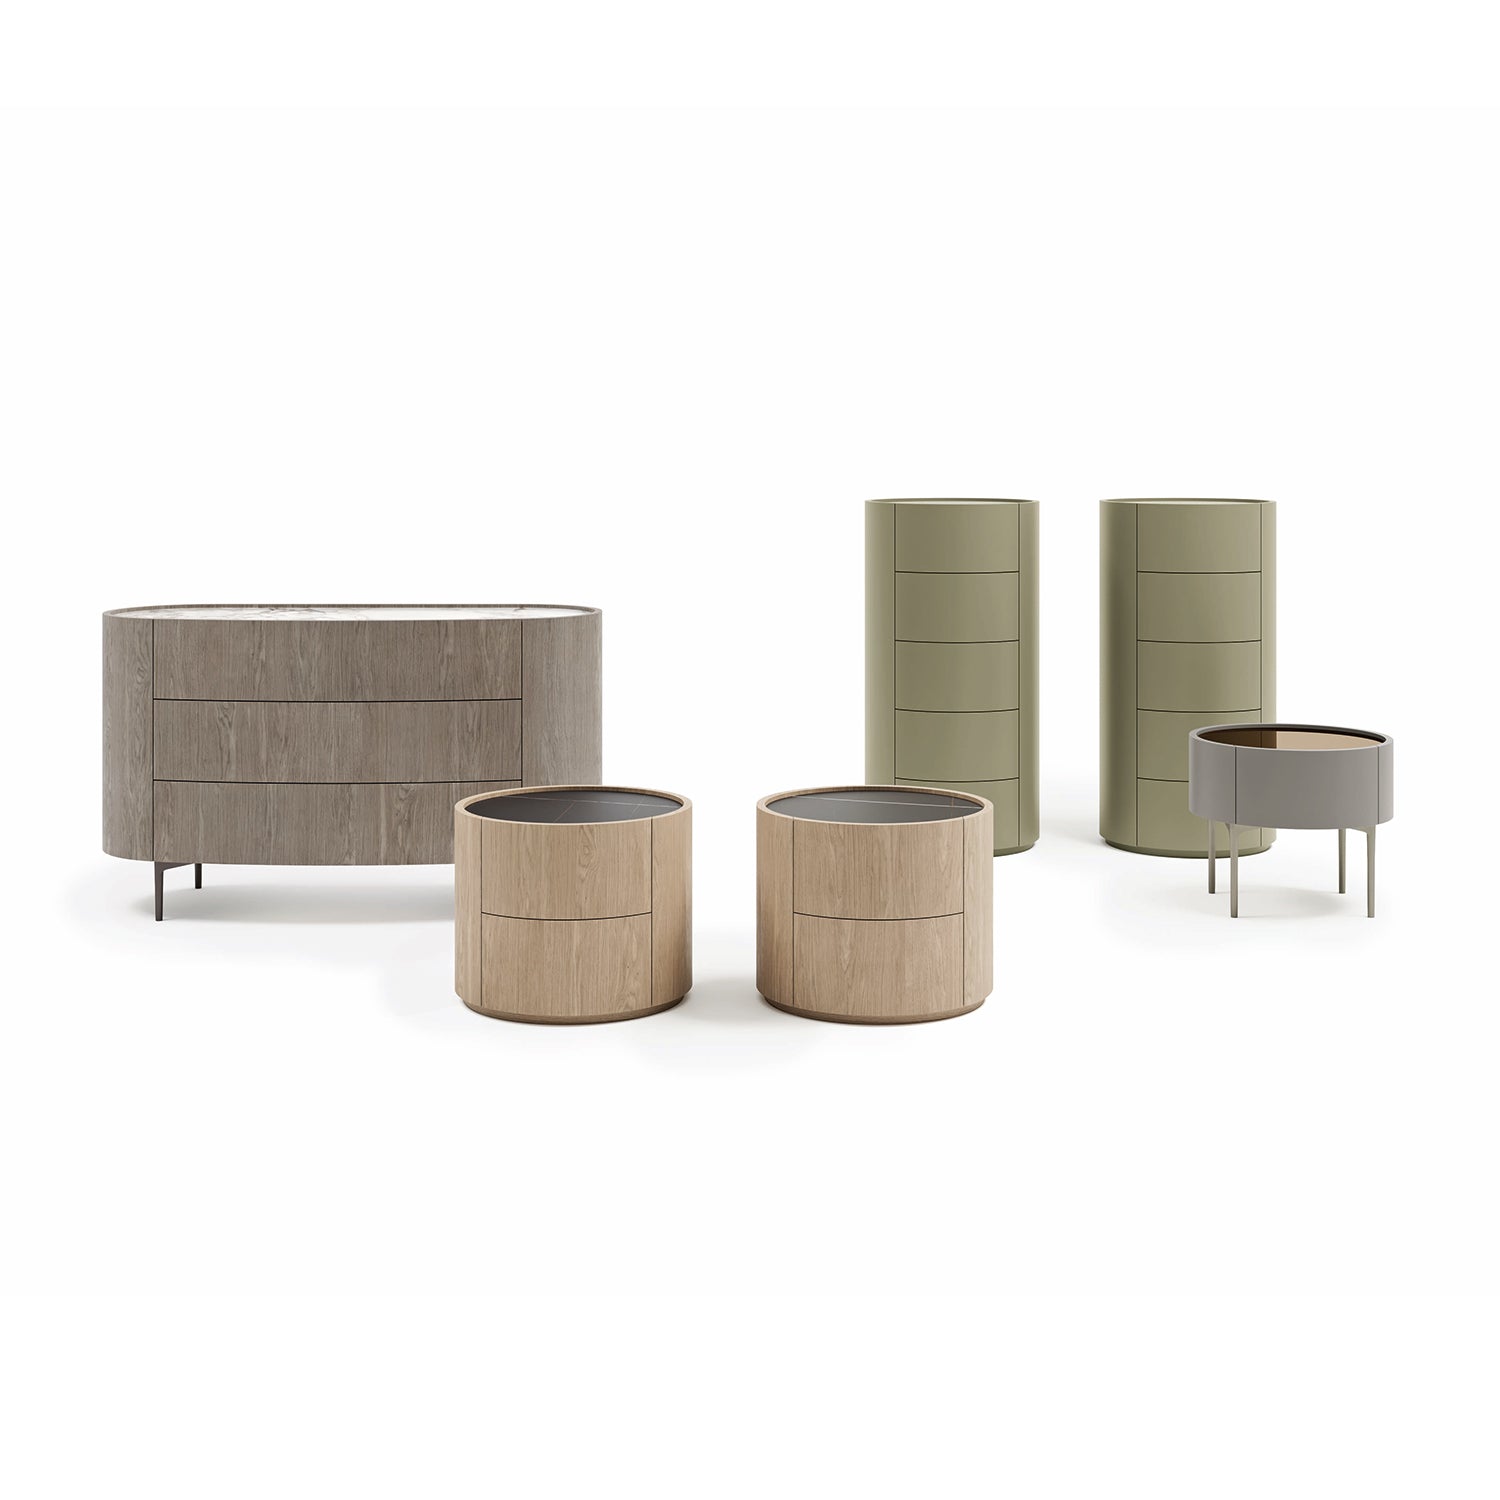 Ronda chest of drawers by Dall'Agnese